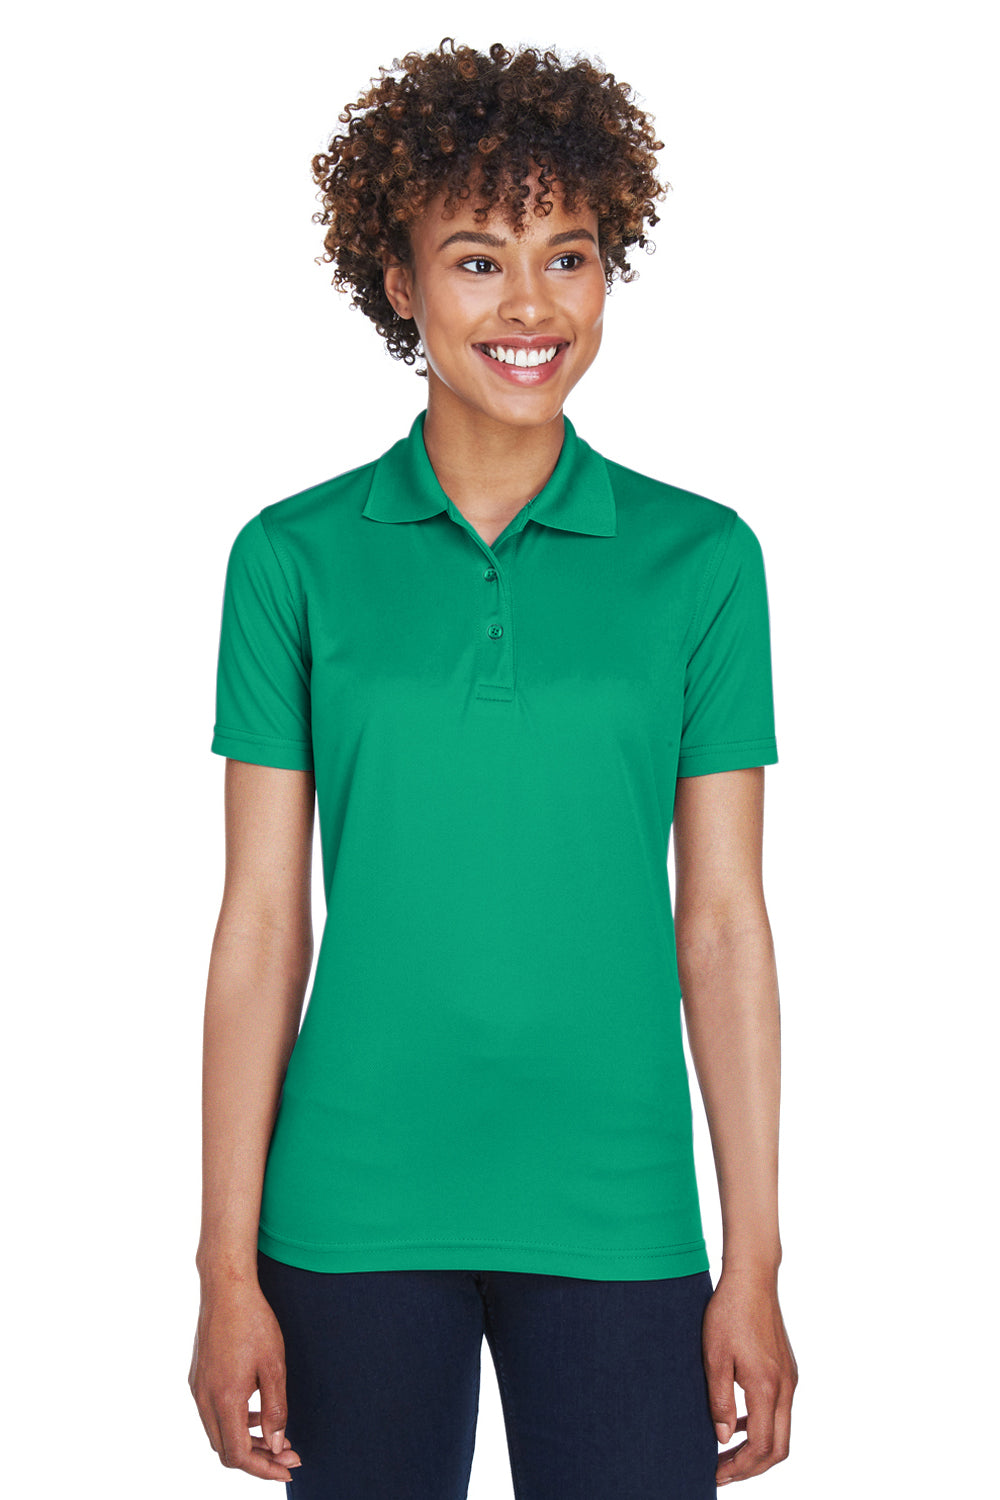 UltraClub 8210L Womens Cool & Dry Moisture Wicking Short Sleeve Polo Shirt Kelly Green Front